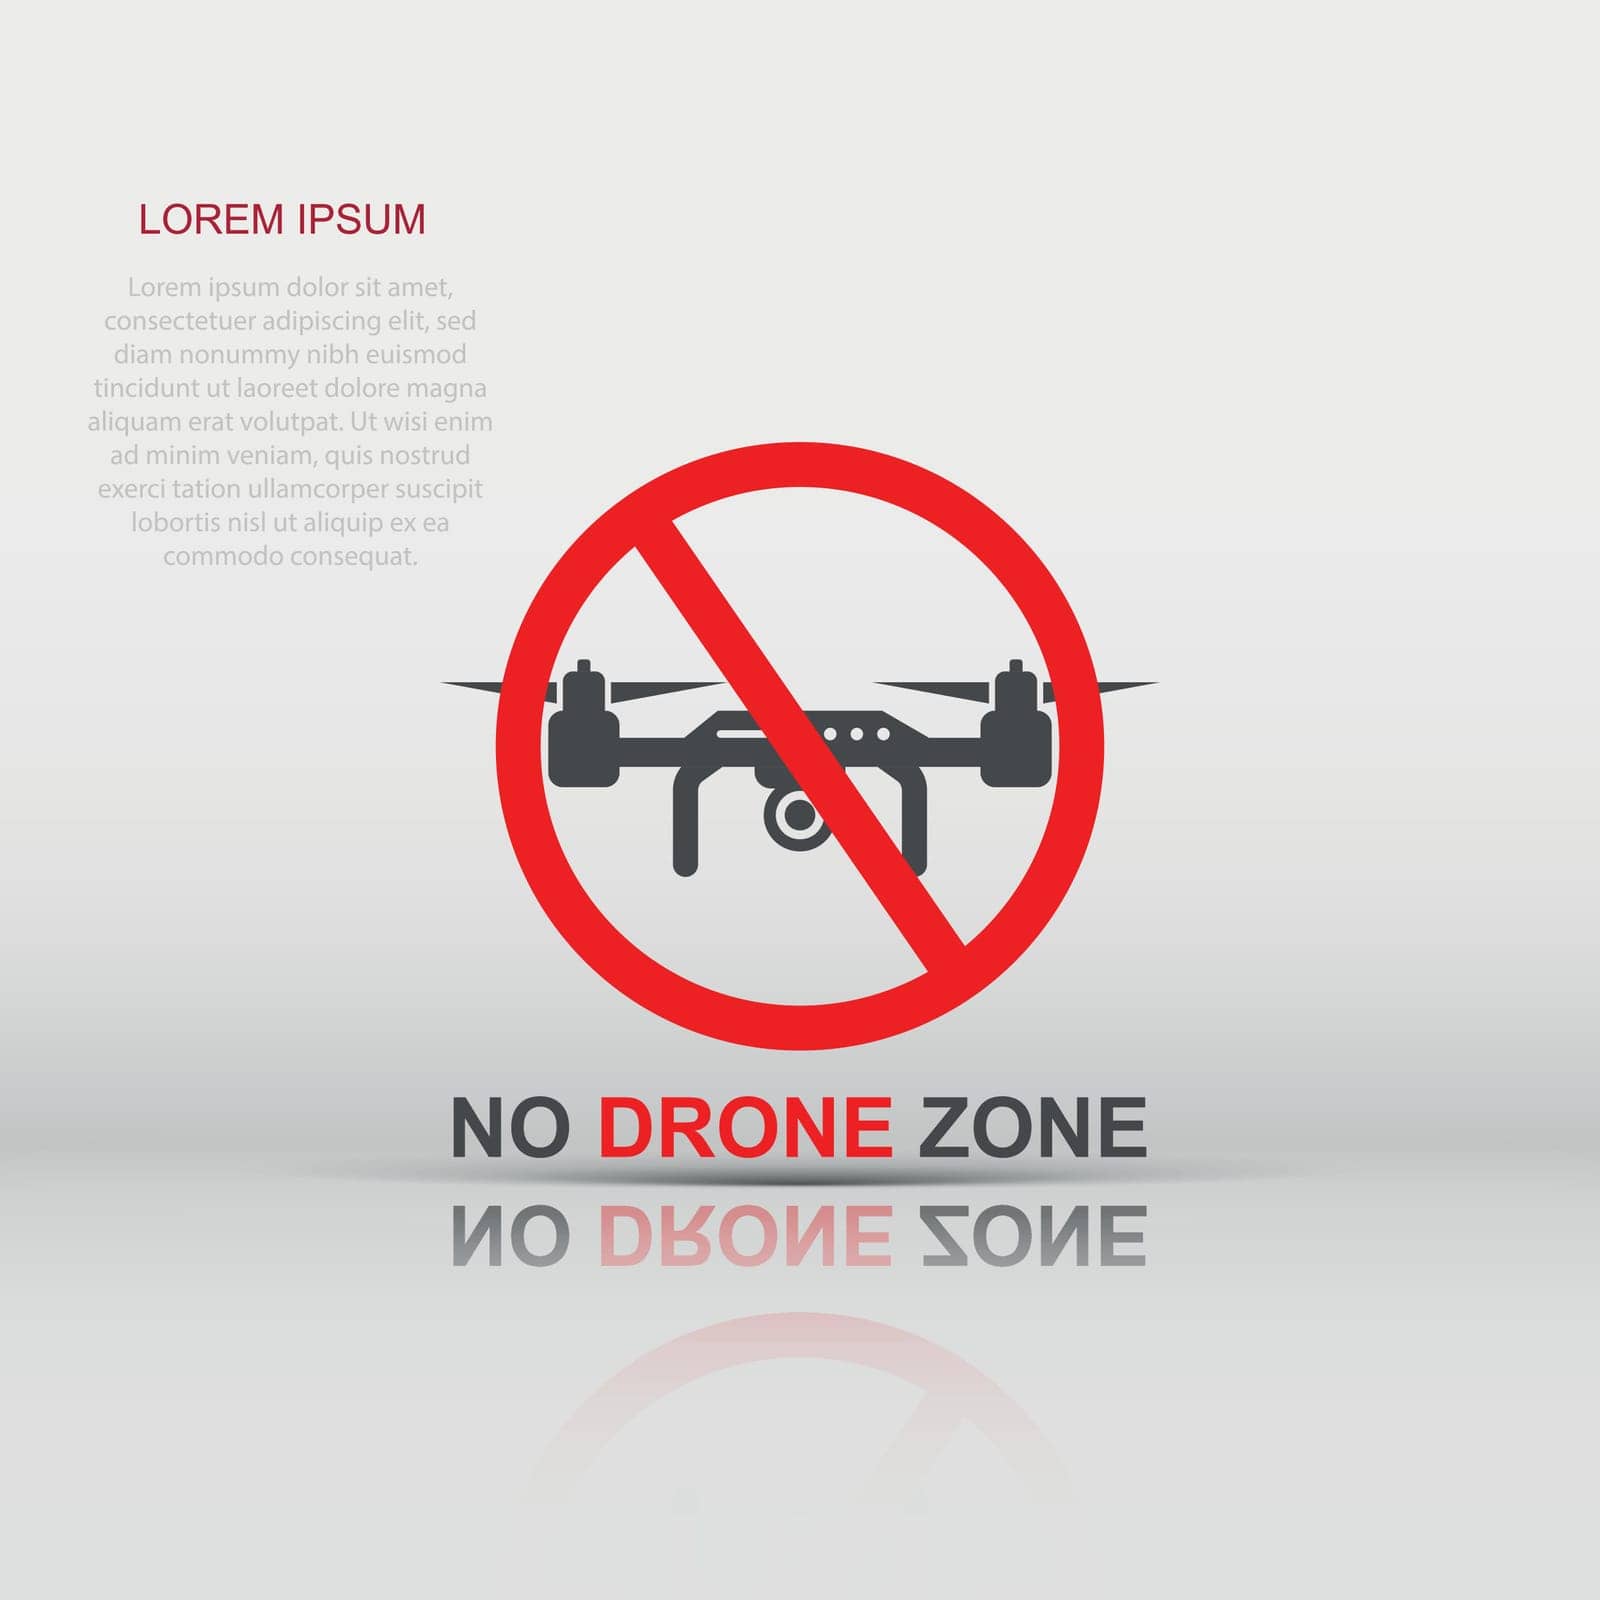 No drone zone sign icon in flat style. Quadrocopter ban vector illustration on white isolated background. Helicopter forbidden flight business concept. by LysenkoA